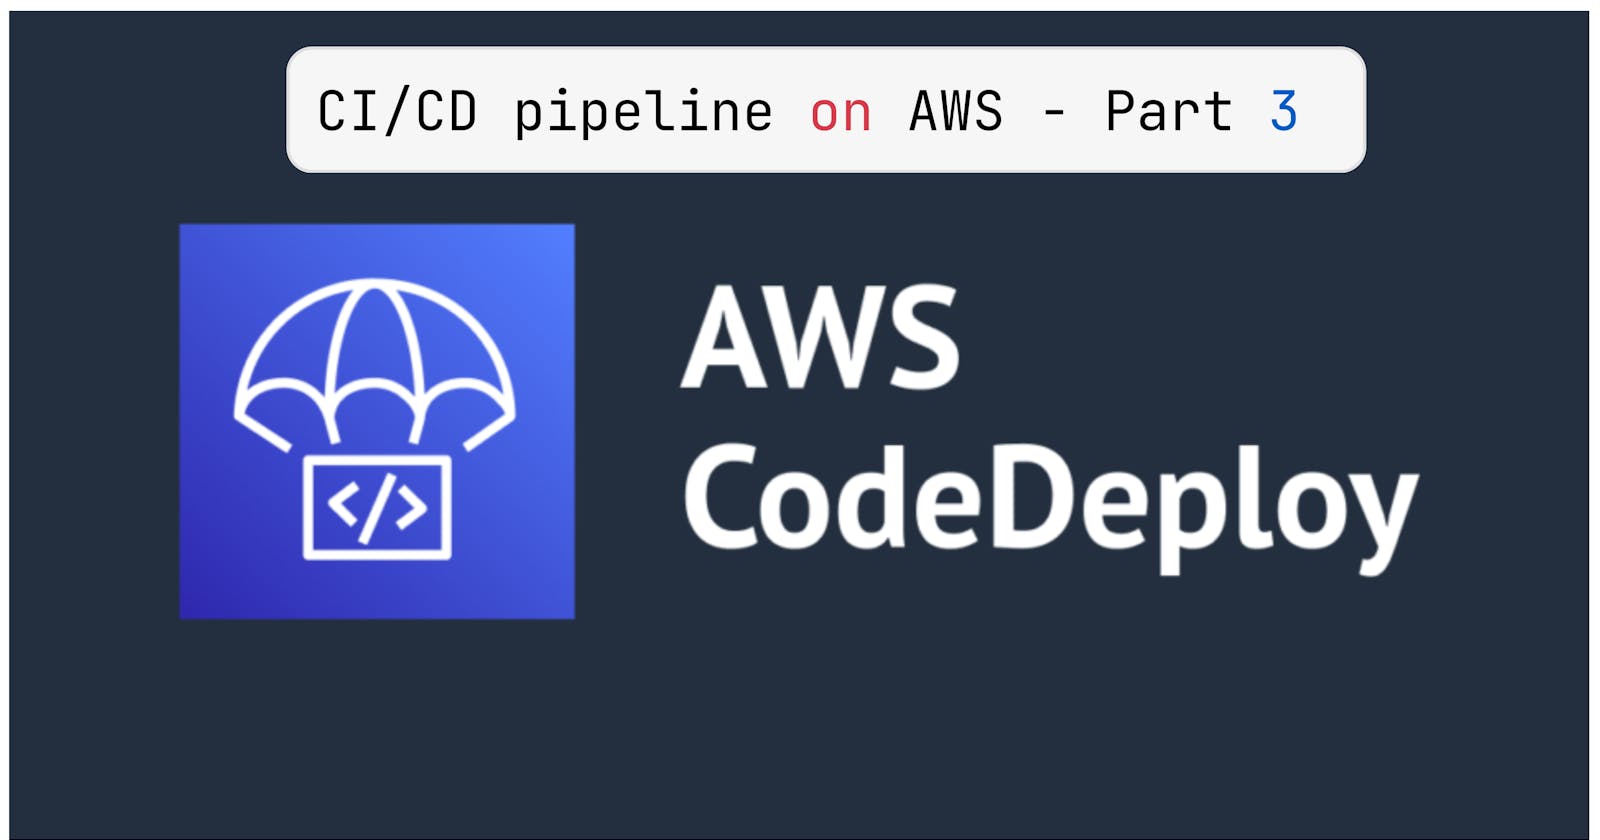 Day 52: CI/CD pipeline on AWS - Part 3 🚀